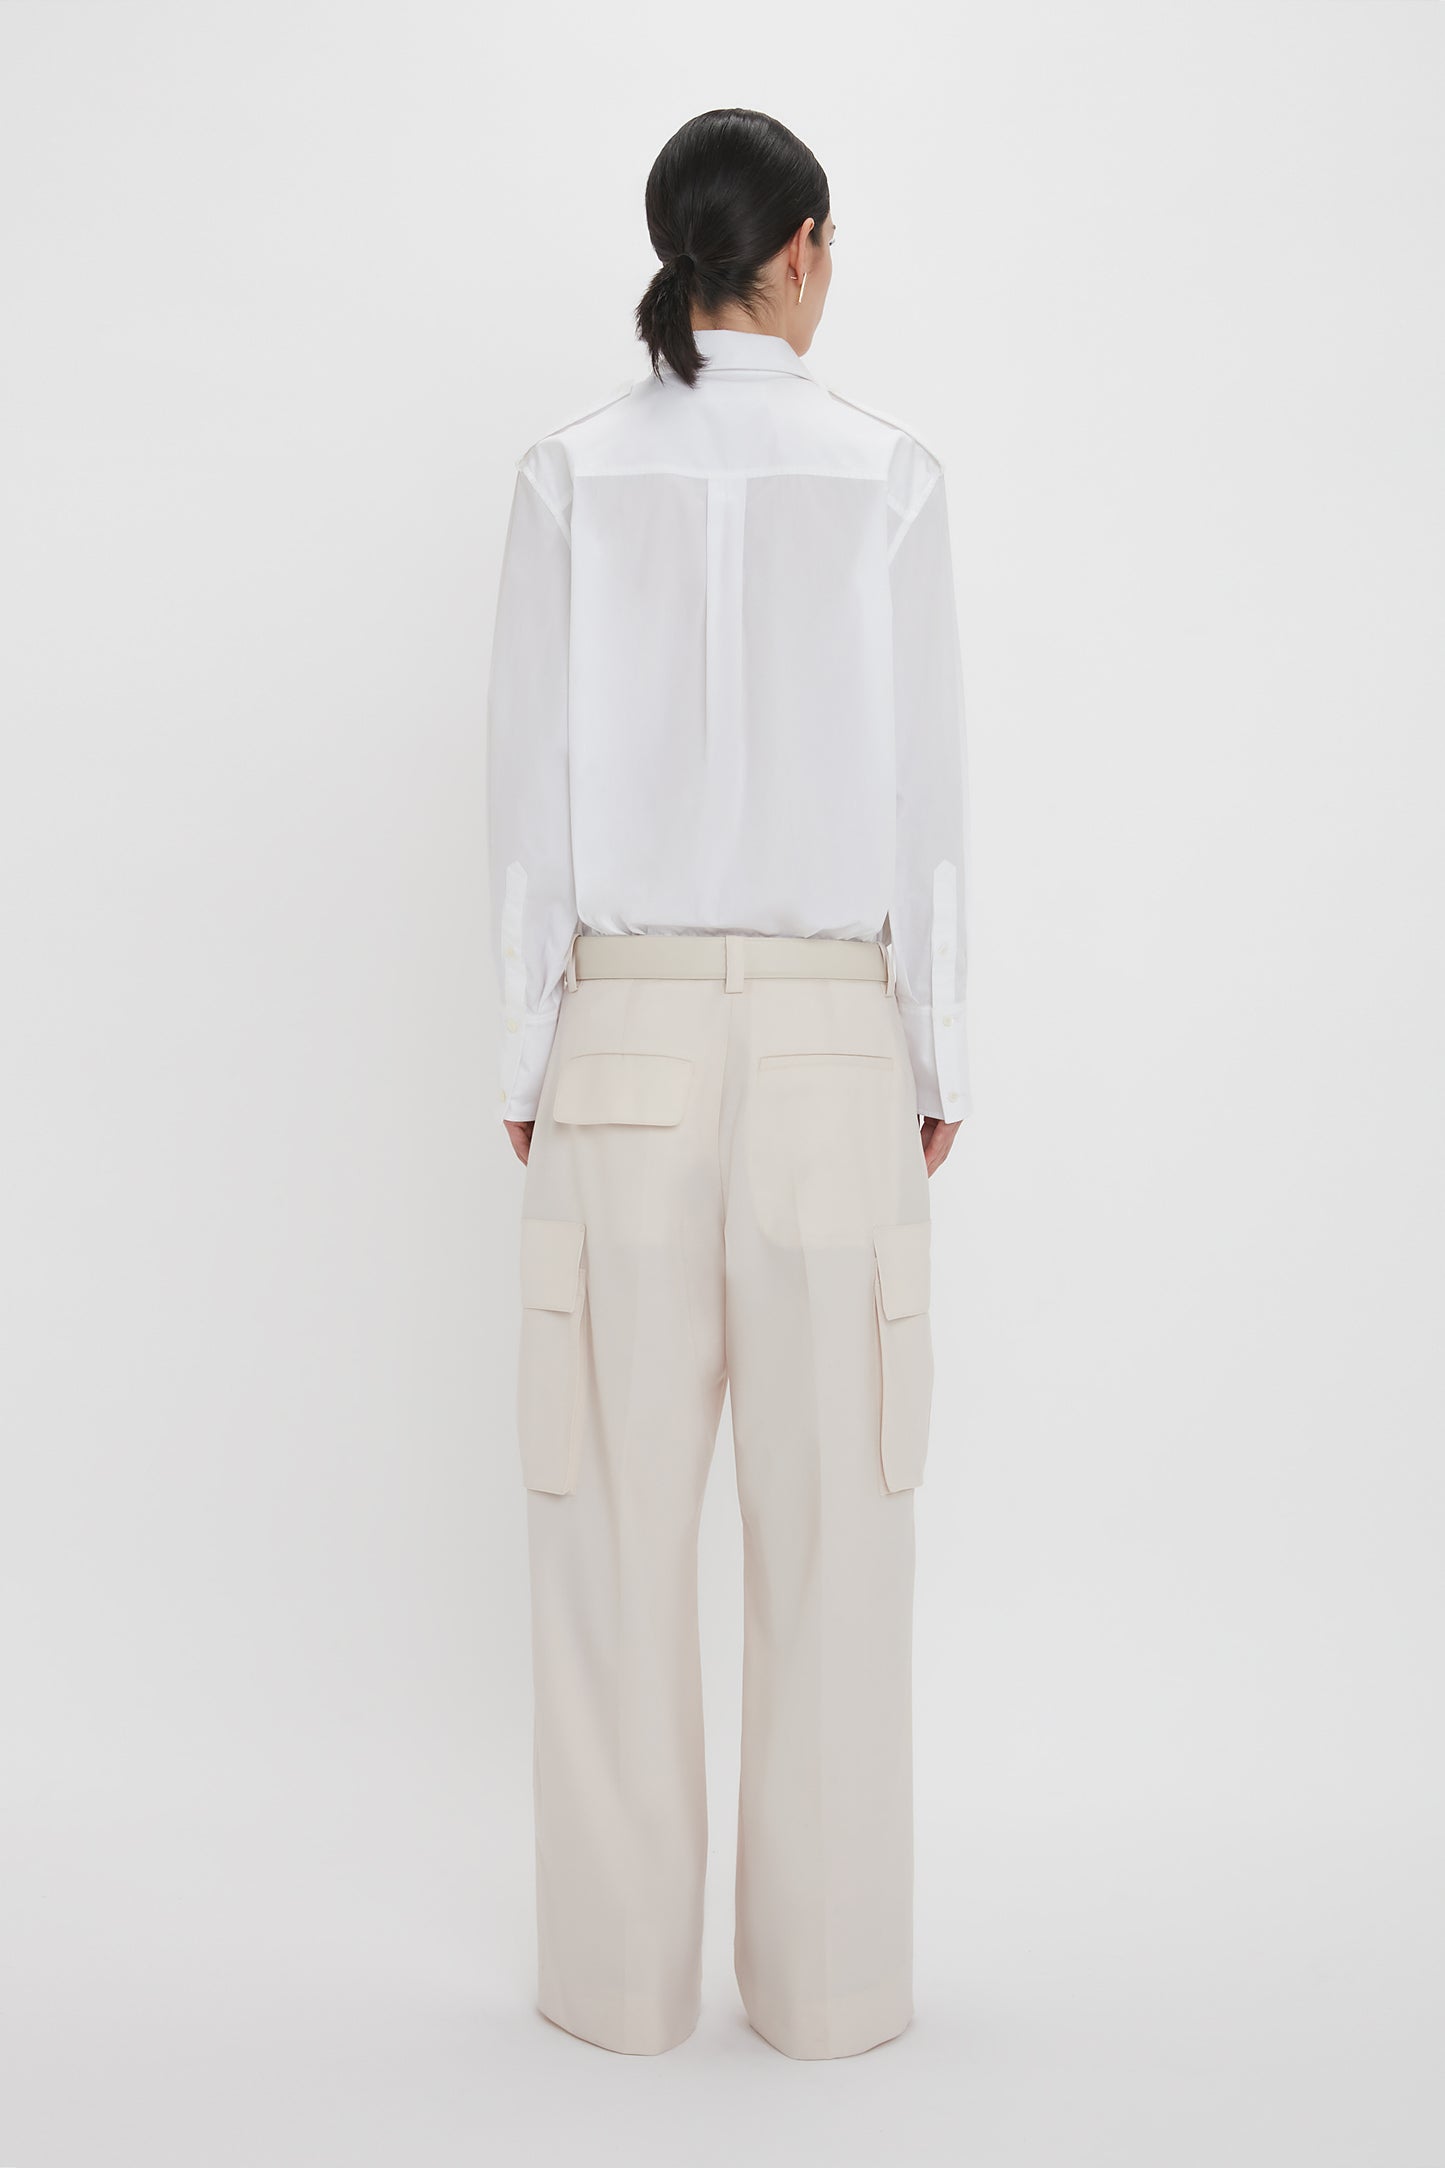 A person with dark hair, tied back, is standing with their back to the camera. They are wearing a Victoria Beckham Oversized Pocket Shirt In White and beige cargo pants with large pockets against a white background.